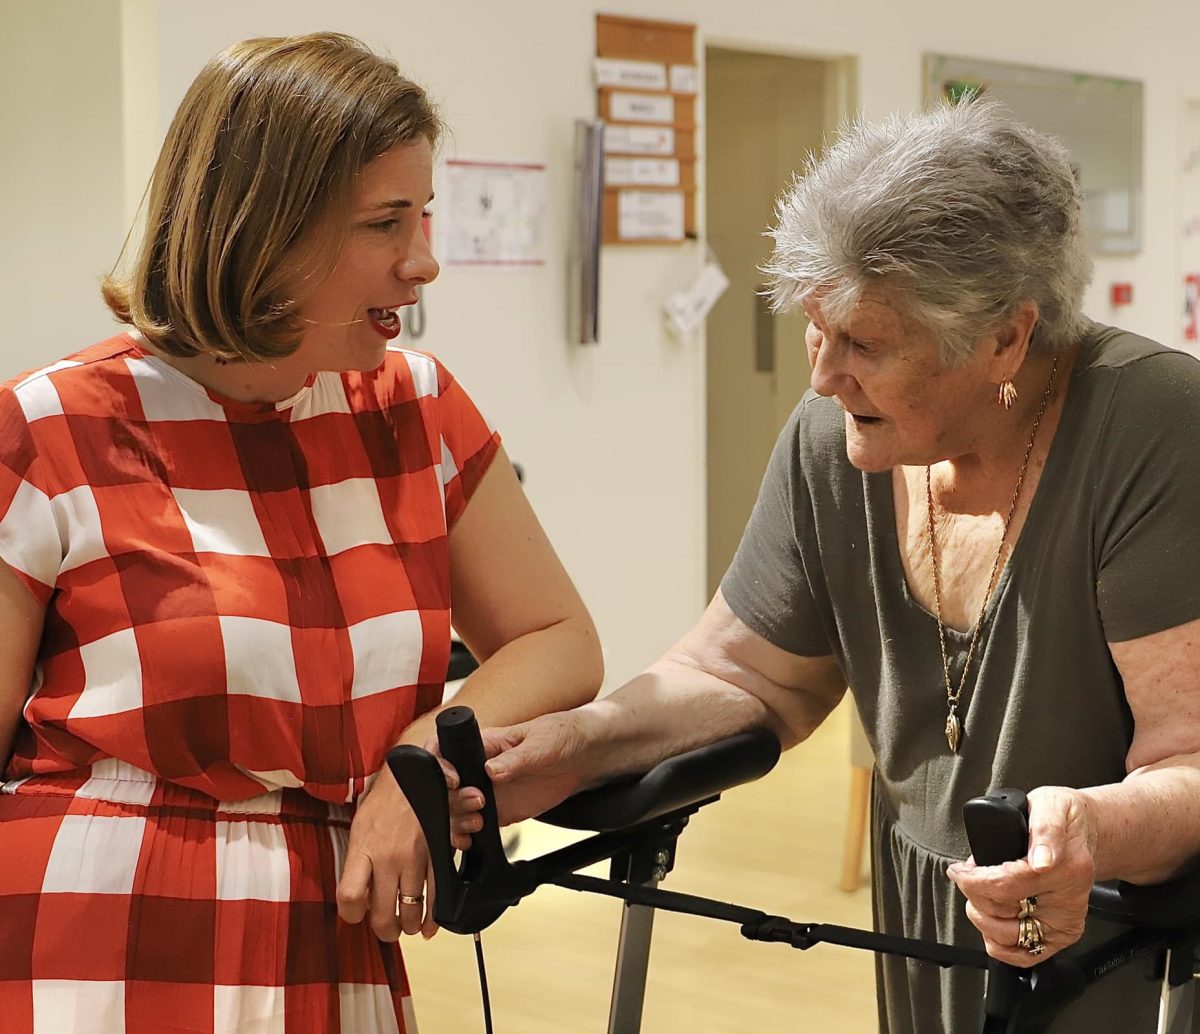 Aged Care Minister Anika Wells chatting with an elderly person at a facility in Rosewood, Queensland